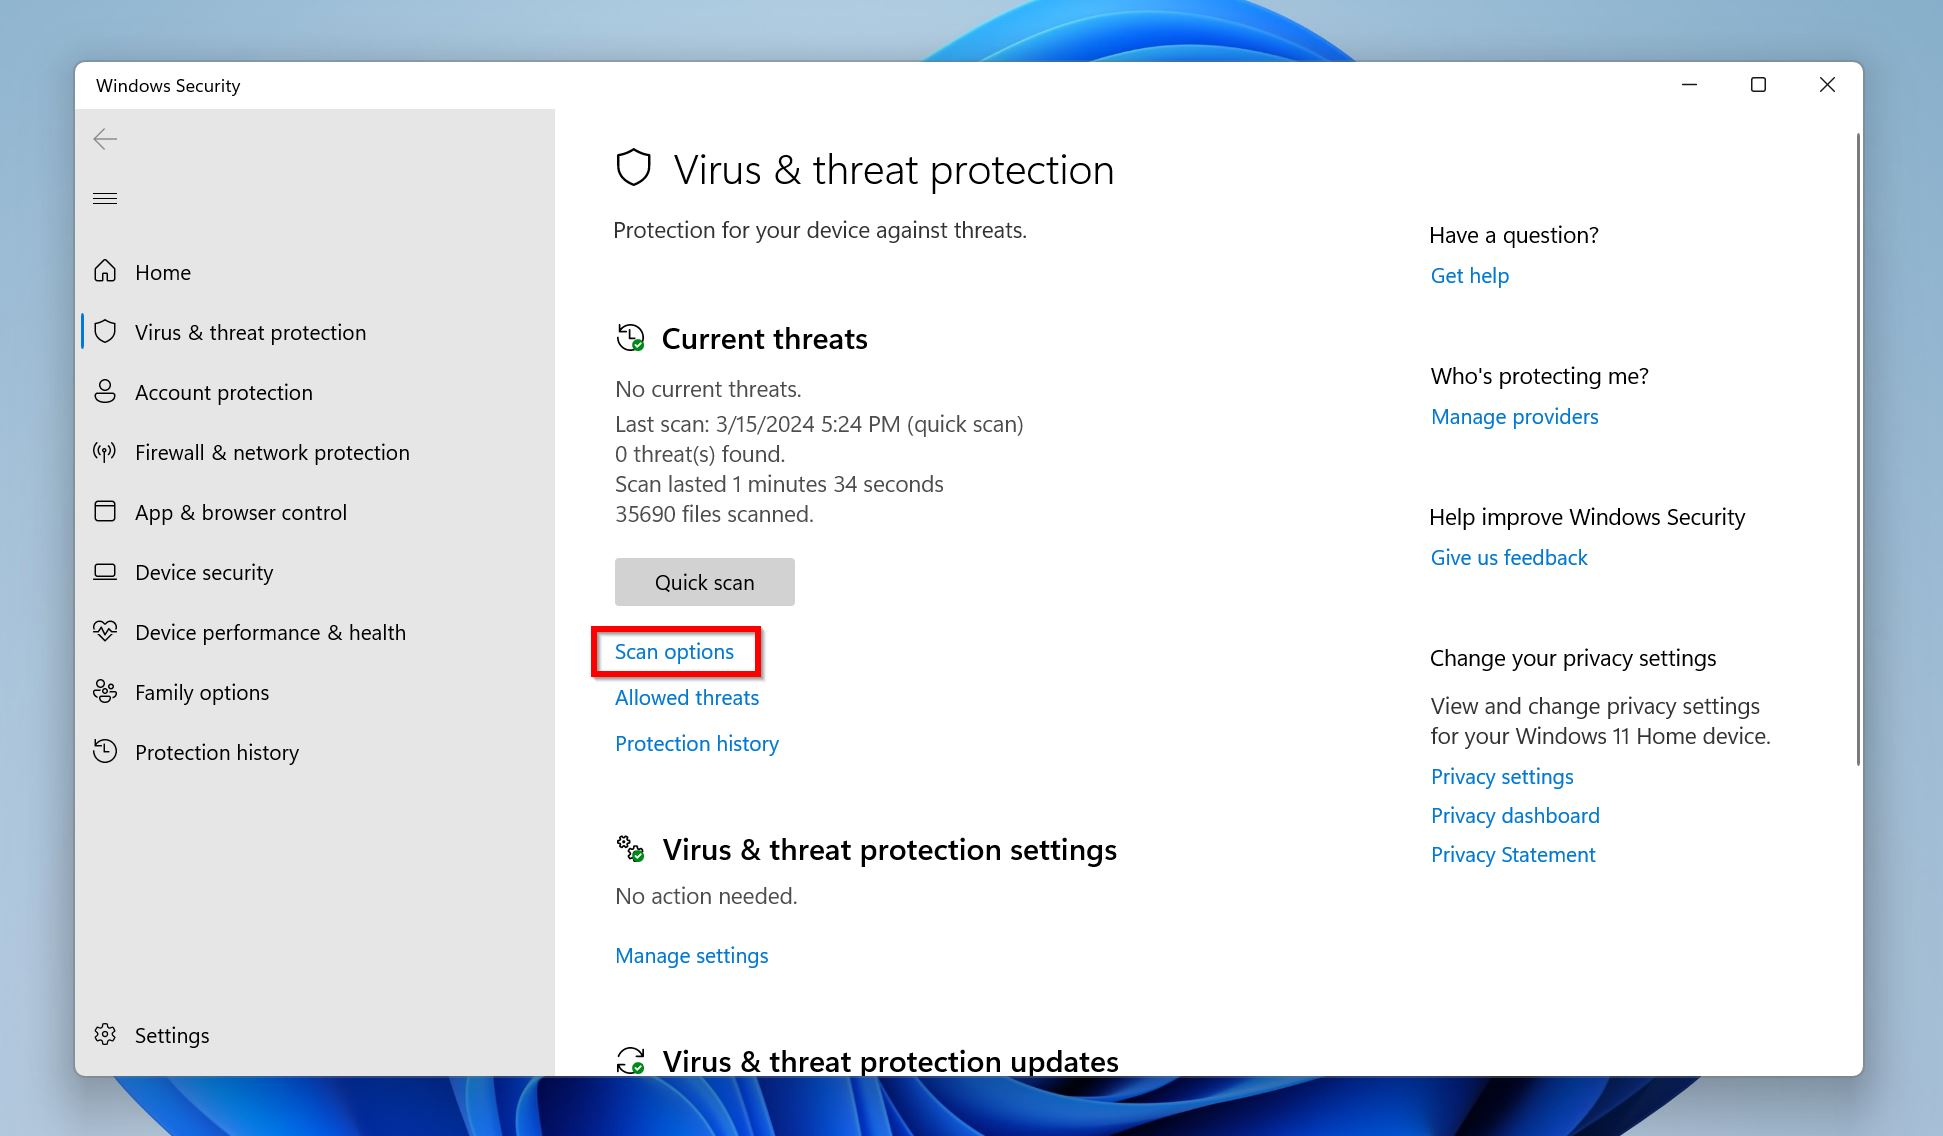 Windows Security window with Virus & threat protection highlighted and Scan options link available.